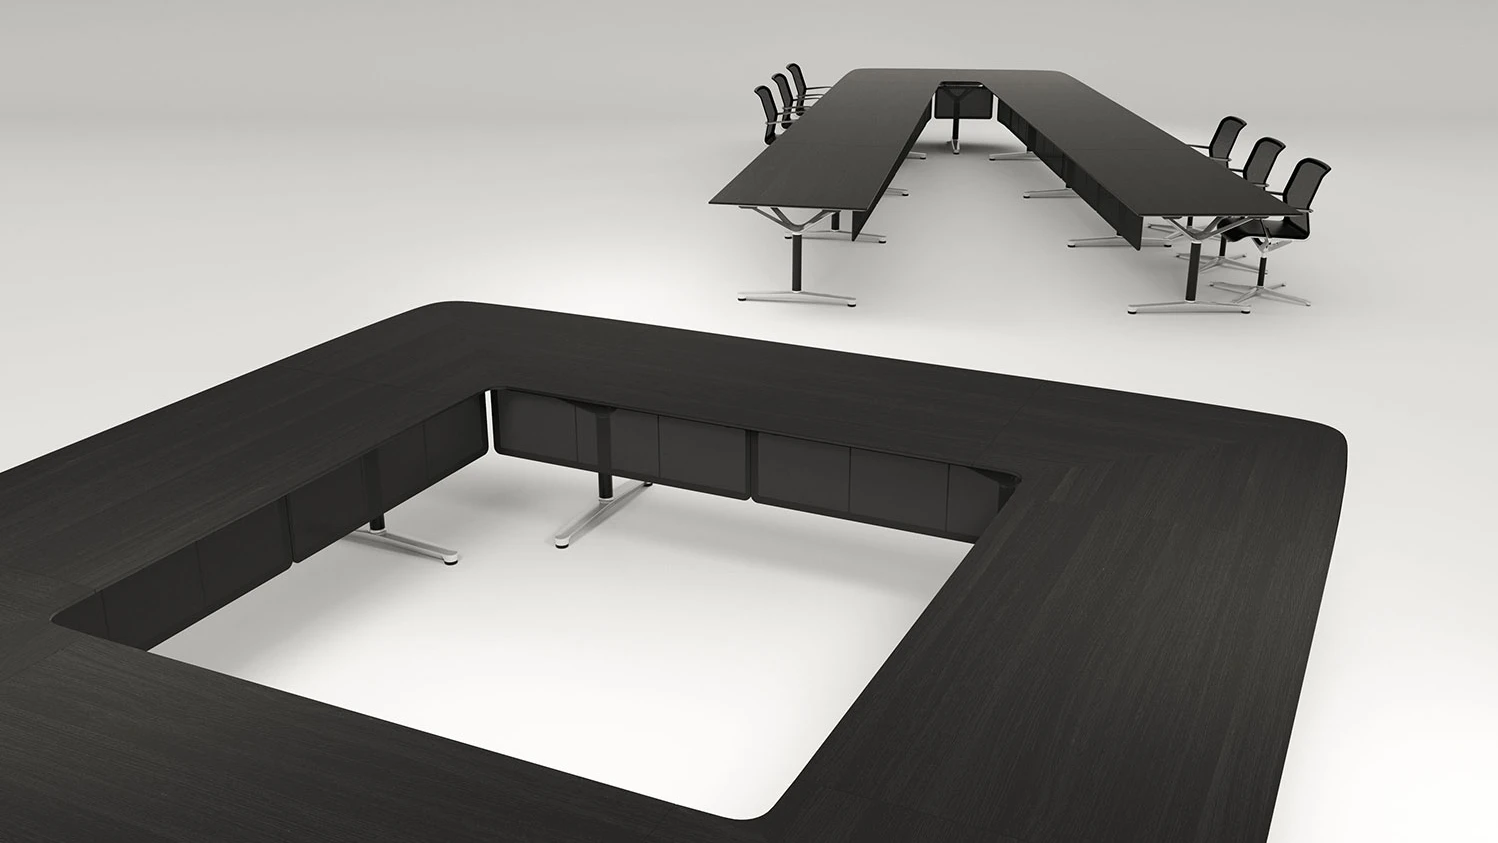 FILO Conference, Premium Seating height Meeting table, Bene Office furniture, Image 2